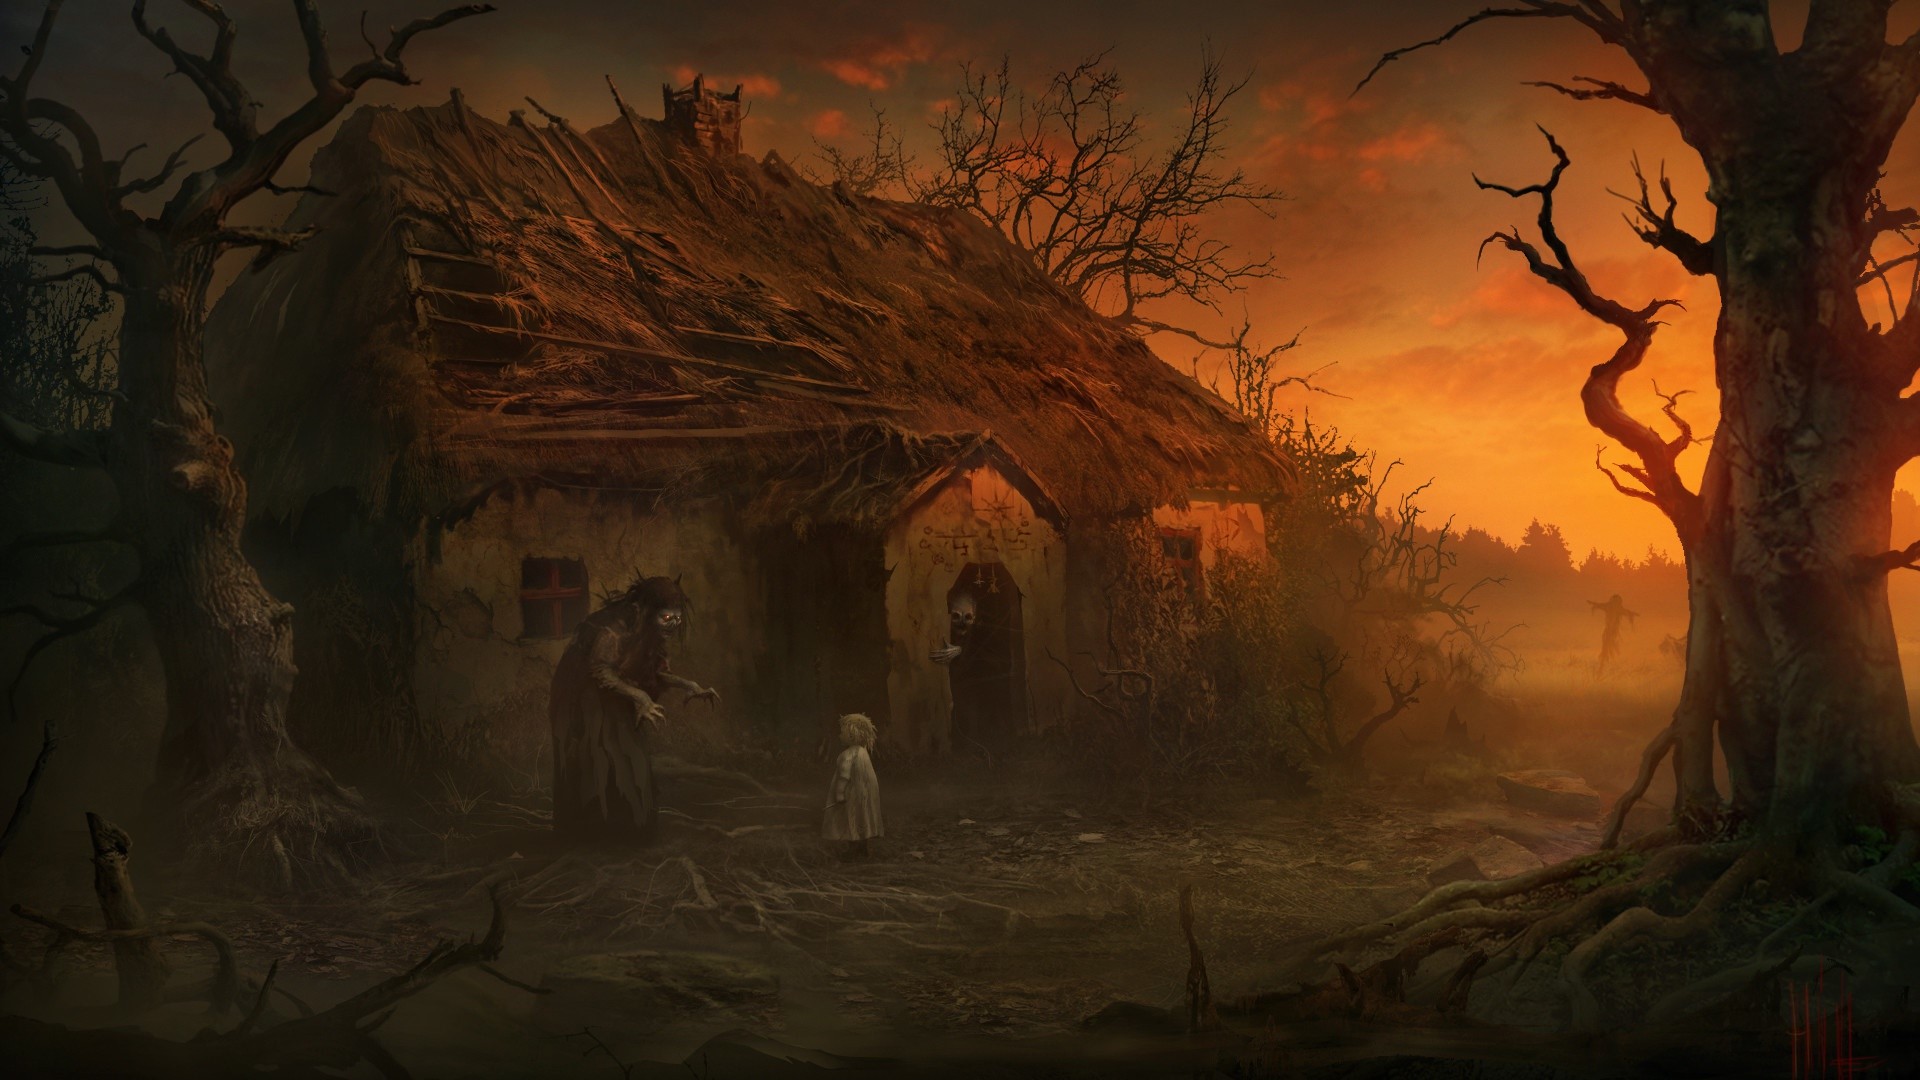 witch, , trees, digital art, artwork, sunset, dead trees, building, spooky, clouds, fantasy art, house, children, roots, scary face, Yuri Hill, creepy Gallery HD Wallpaper